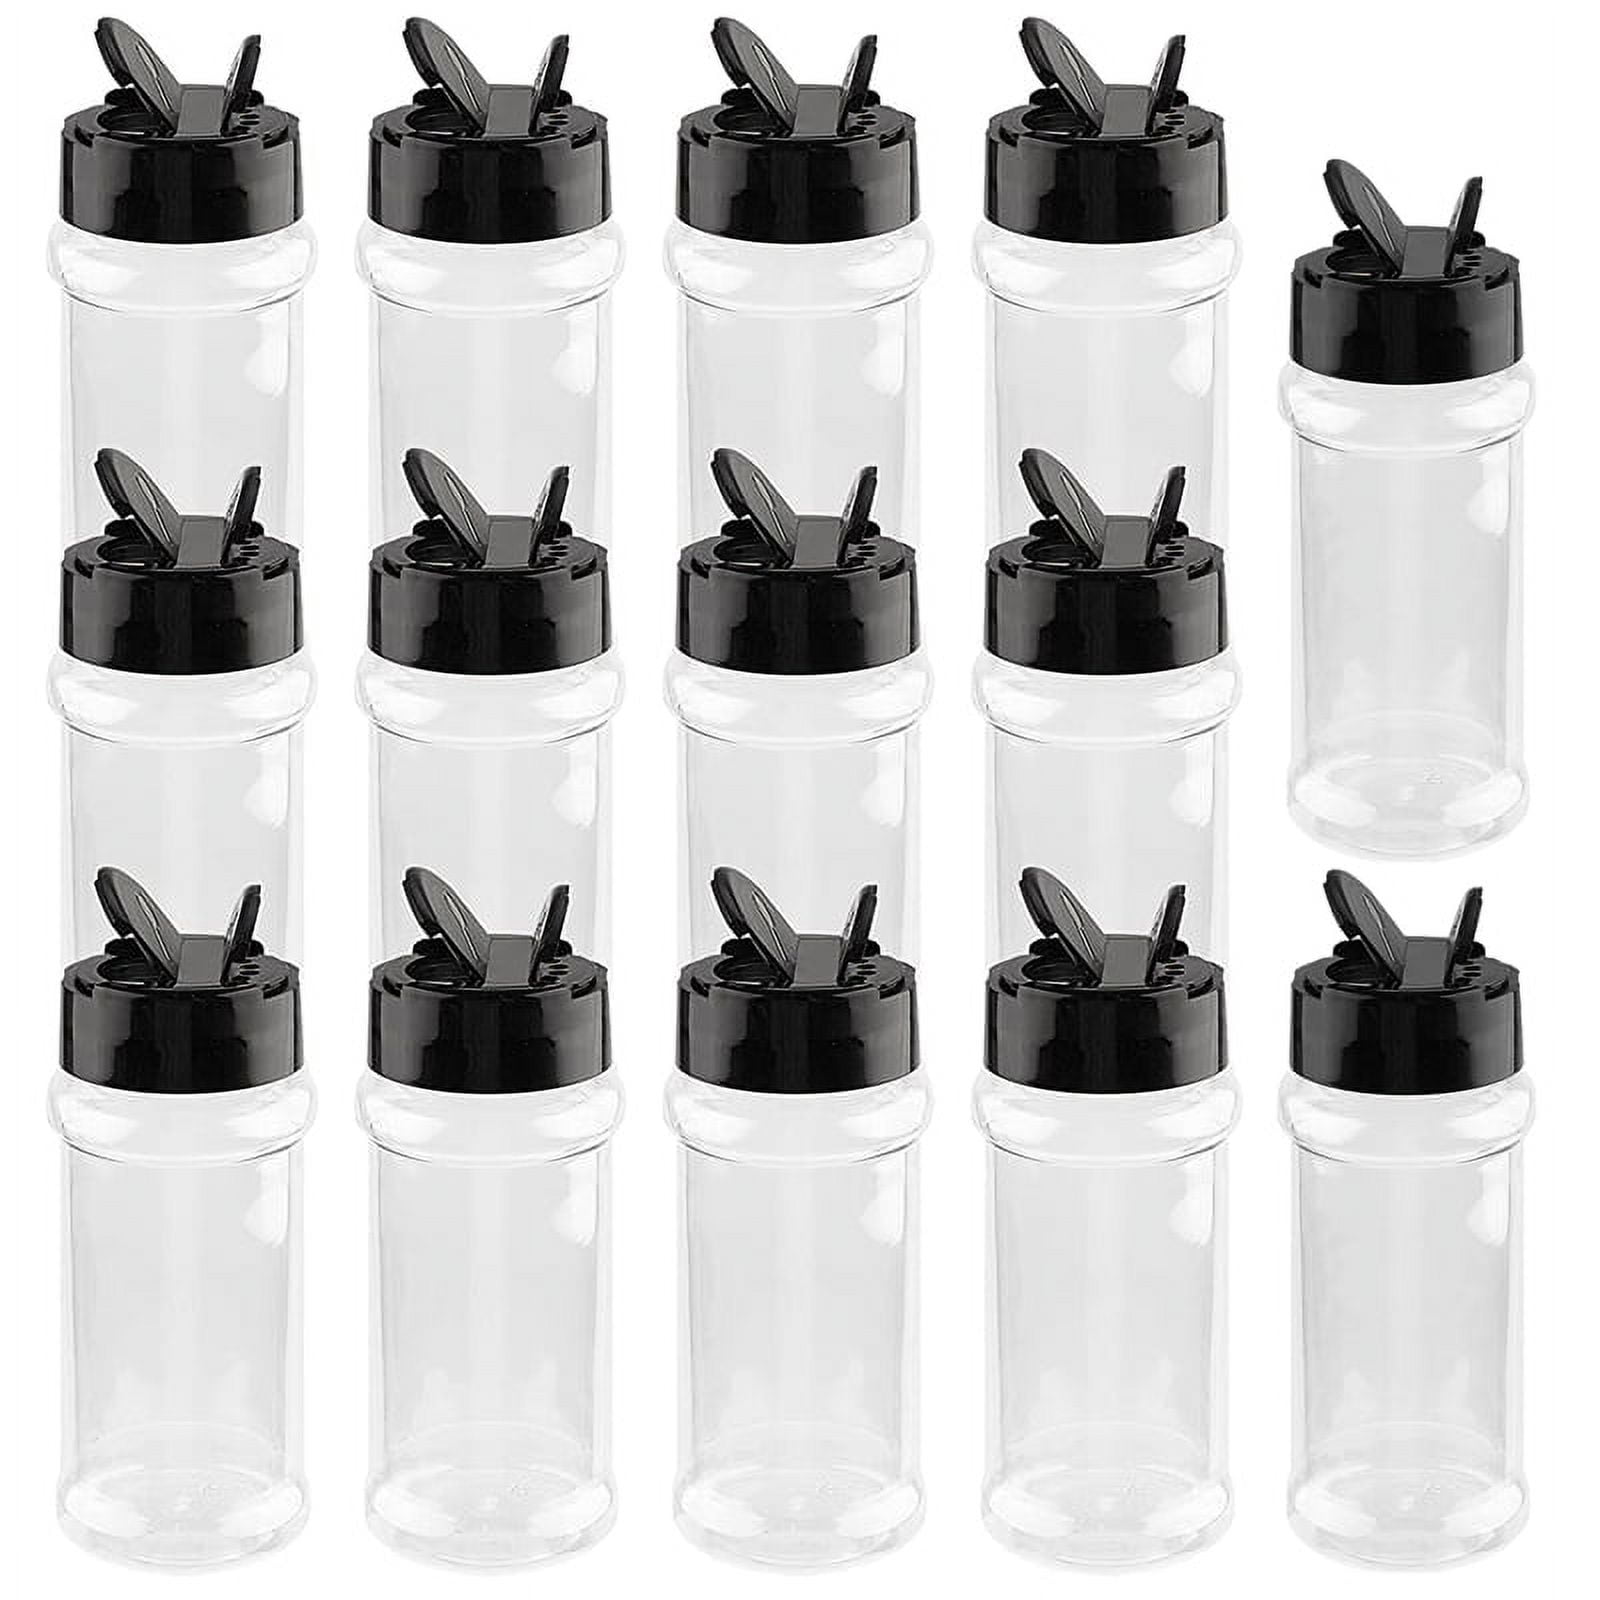 Baire Bottles 8 oz Empty Clear Plastic Spice Jars Shaker Lids 6 Pk Sifter  Shaker Holes and Pour Open Sides Sealed for Freshness Liners BPA Free